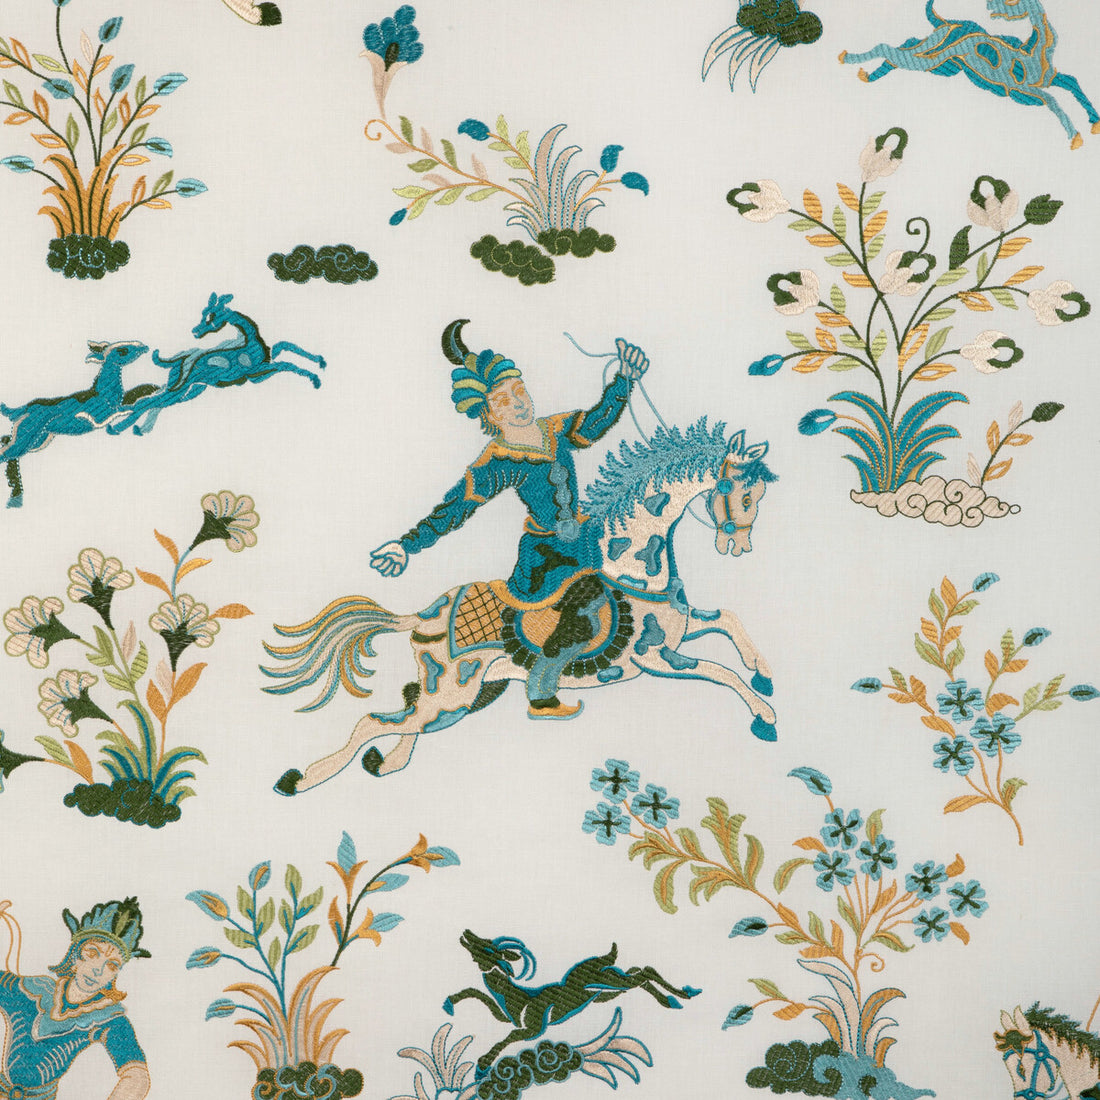 Nayan Emb fabric in aqua/leaf color - pattern 8023120.353.0 - by Brunschwig &amp; Fils in the Anduze Embroideries collection